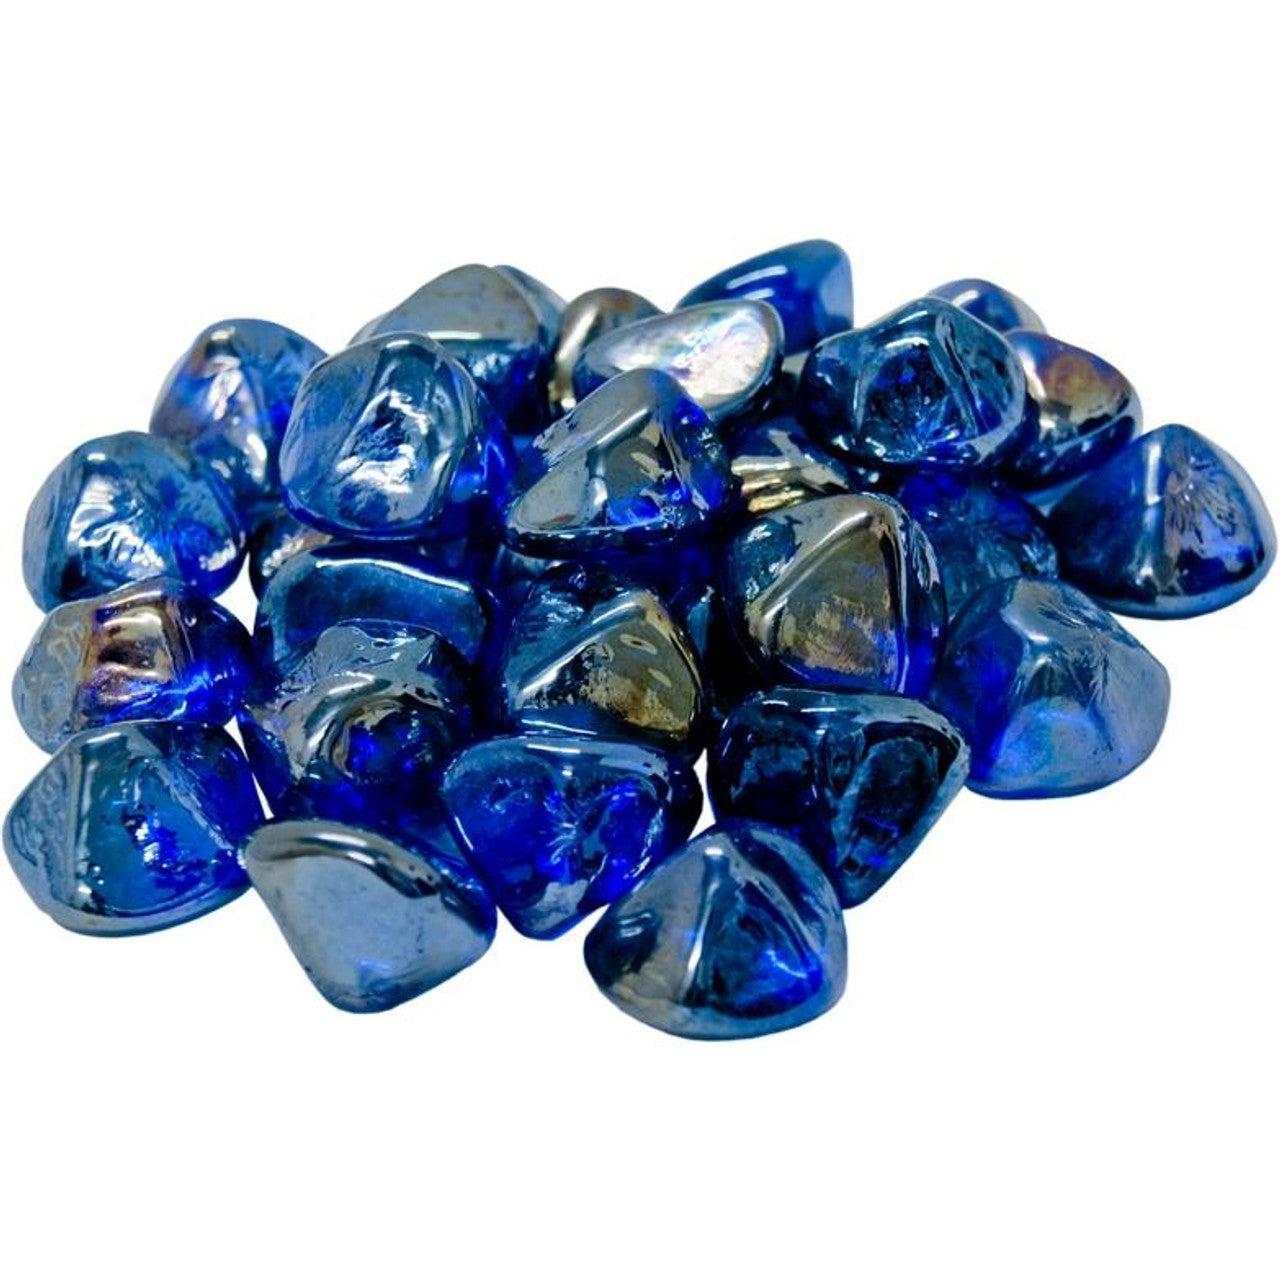 70 lb. Package of Diamond Nuggets Glass Media